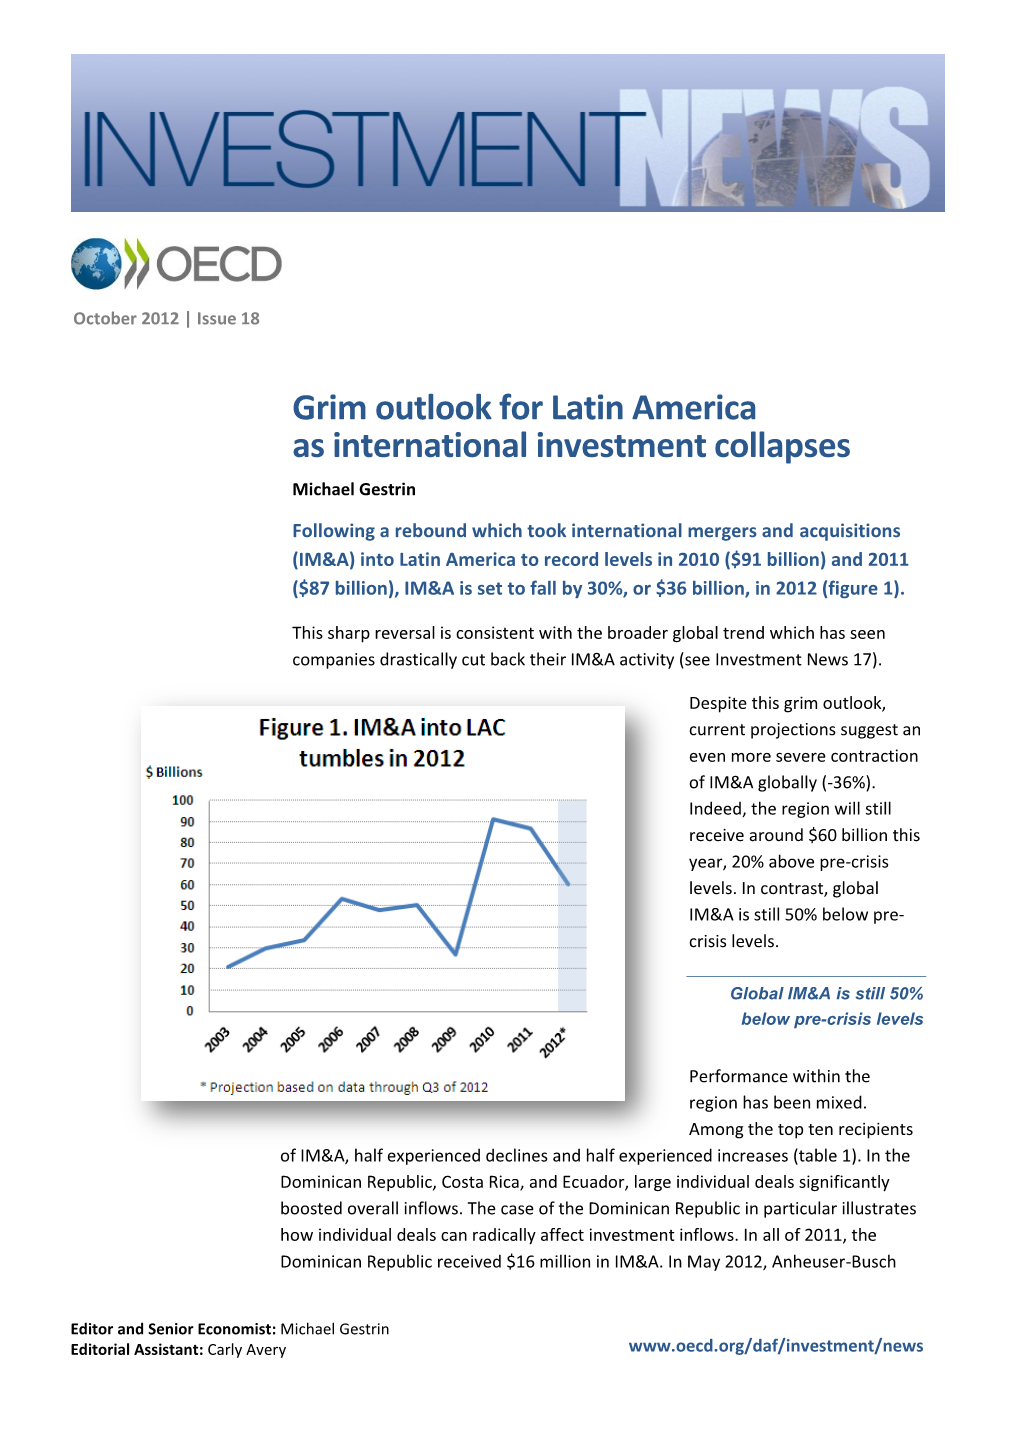 Grim Outlook for Latin America As International Investment Collapses